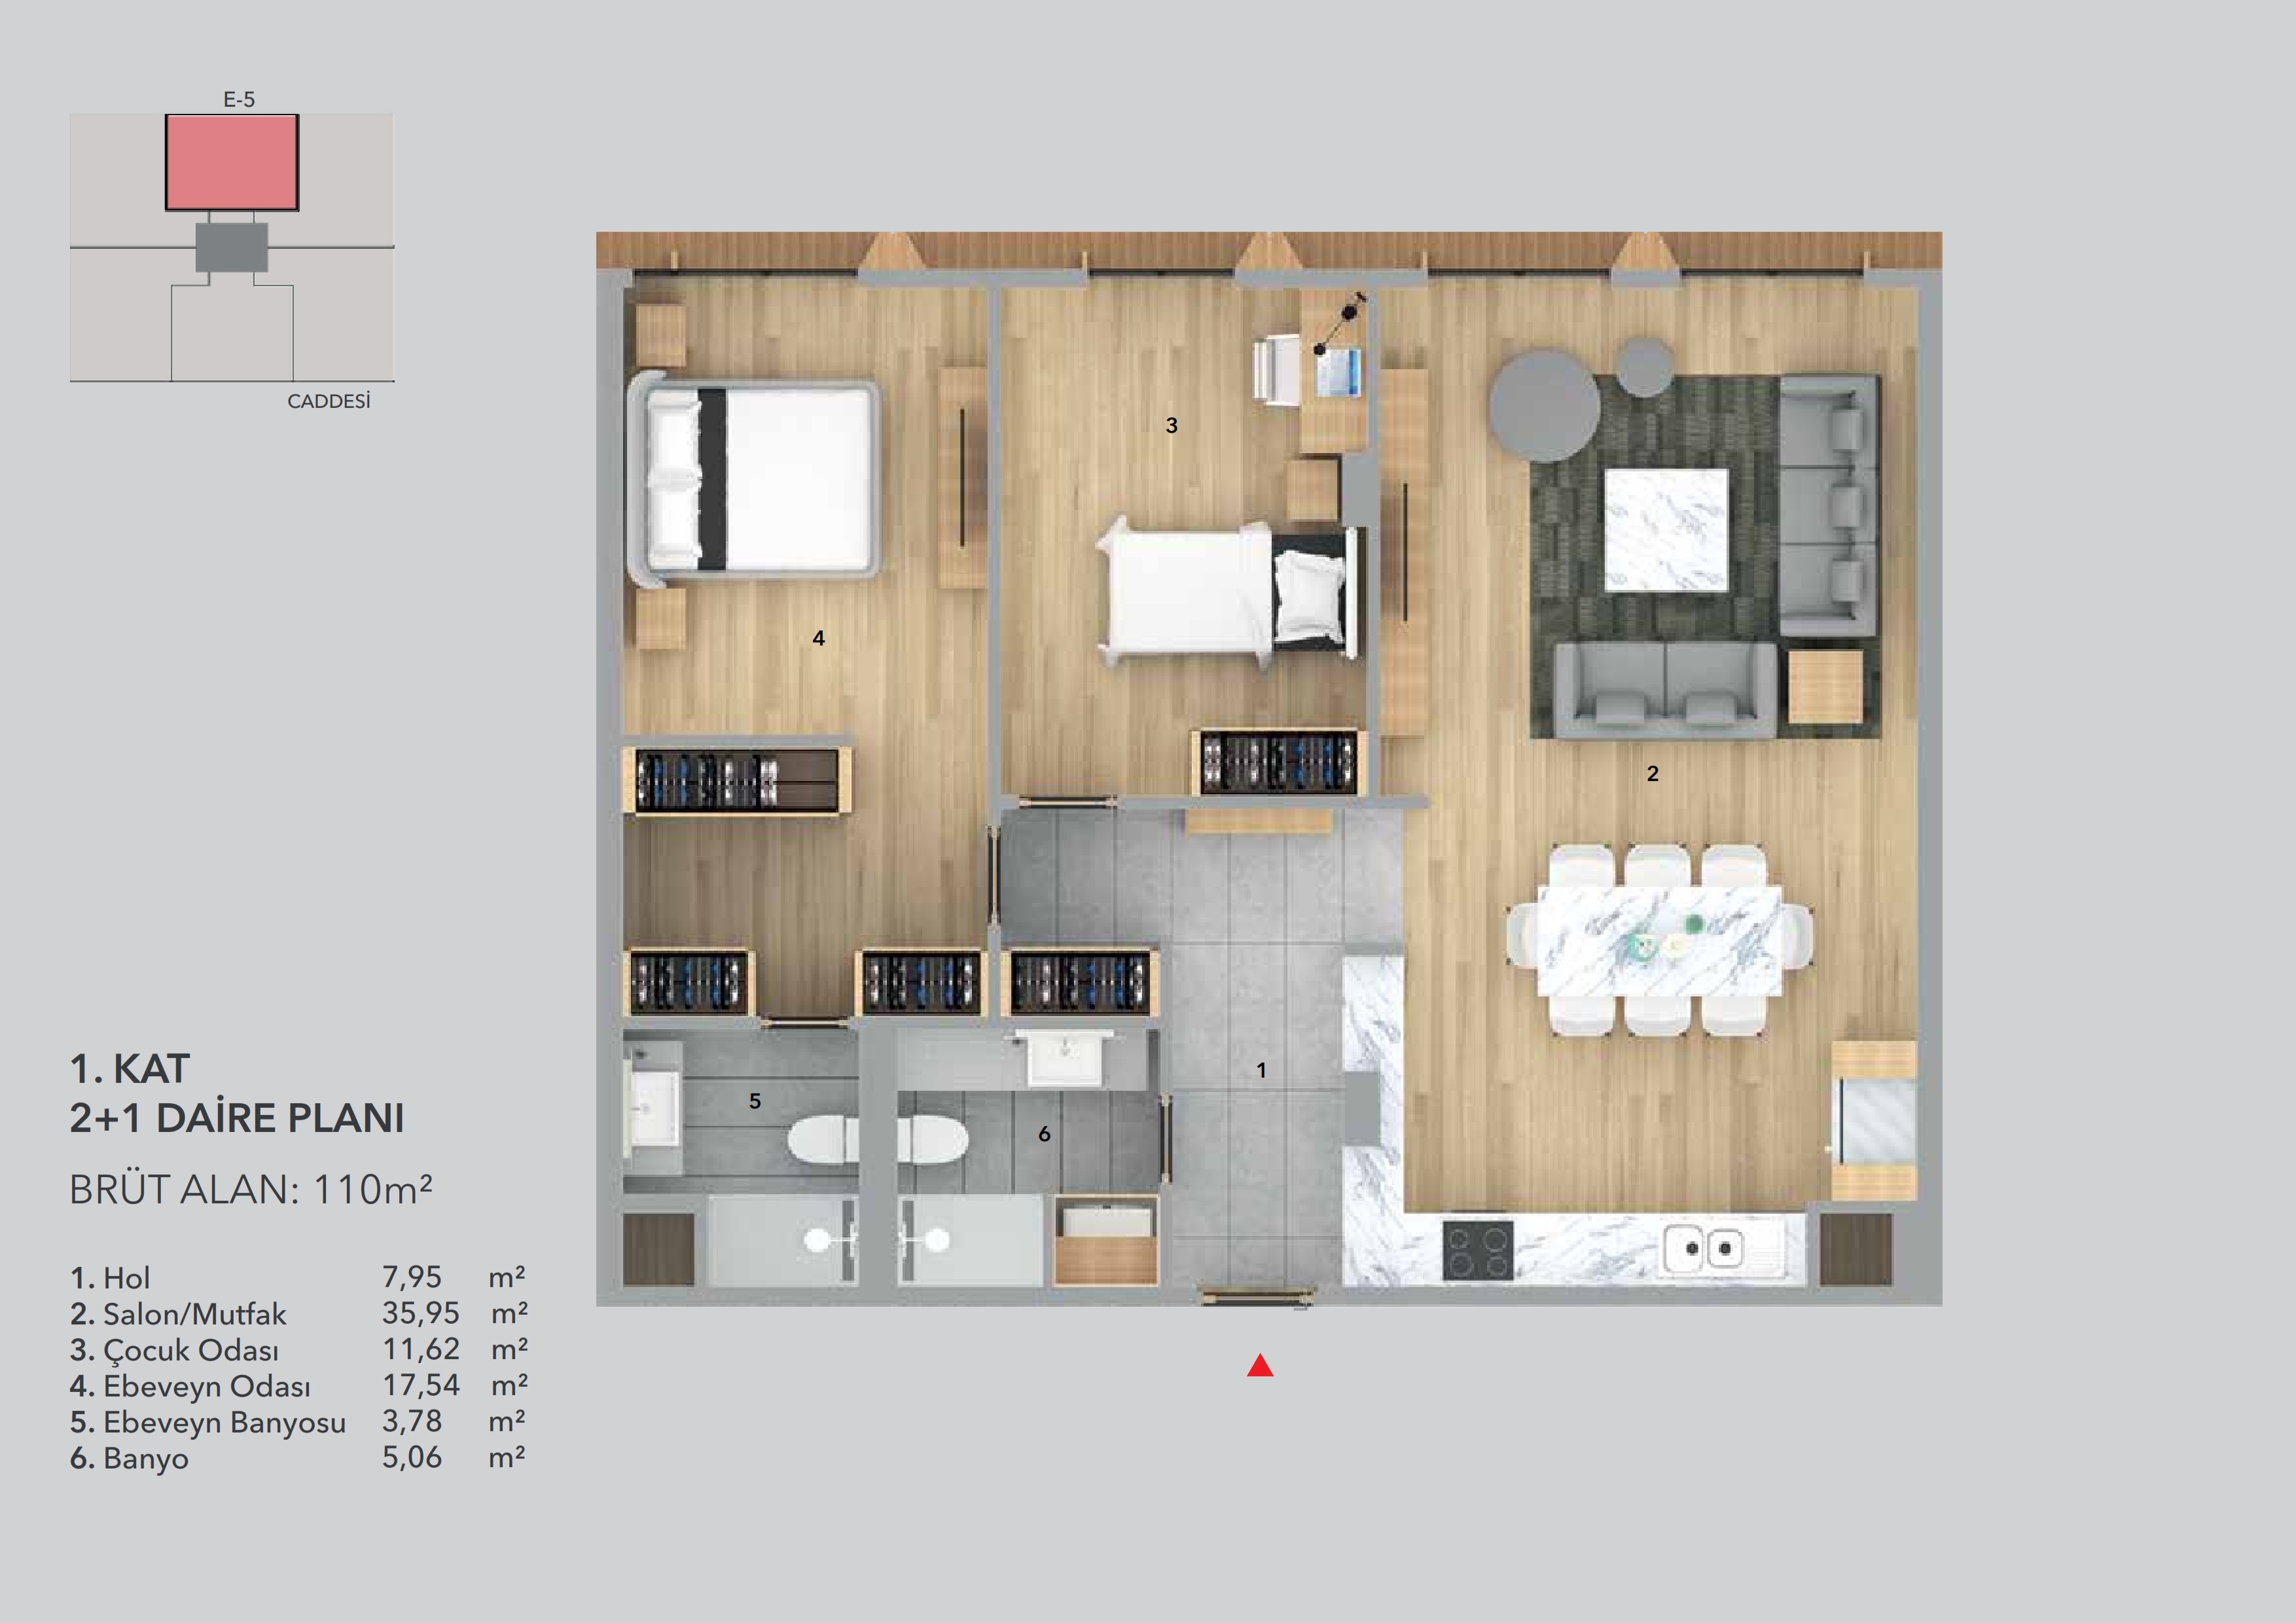 TWO-BEDROOM 110 m2